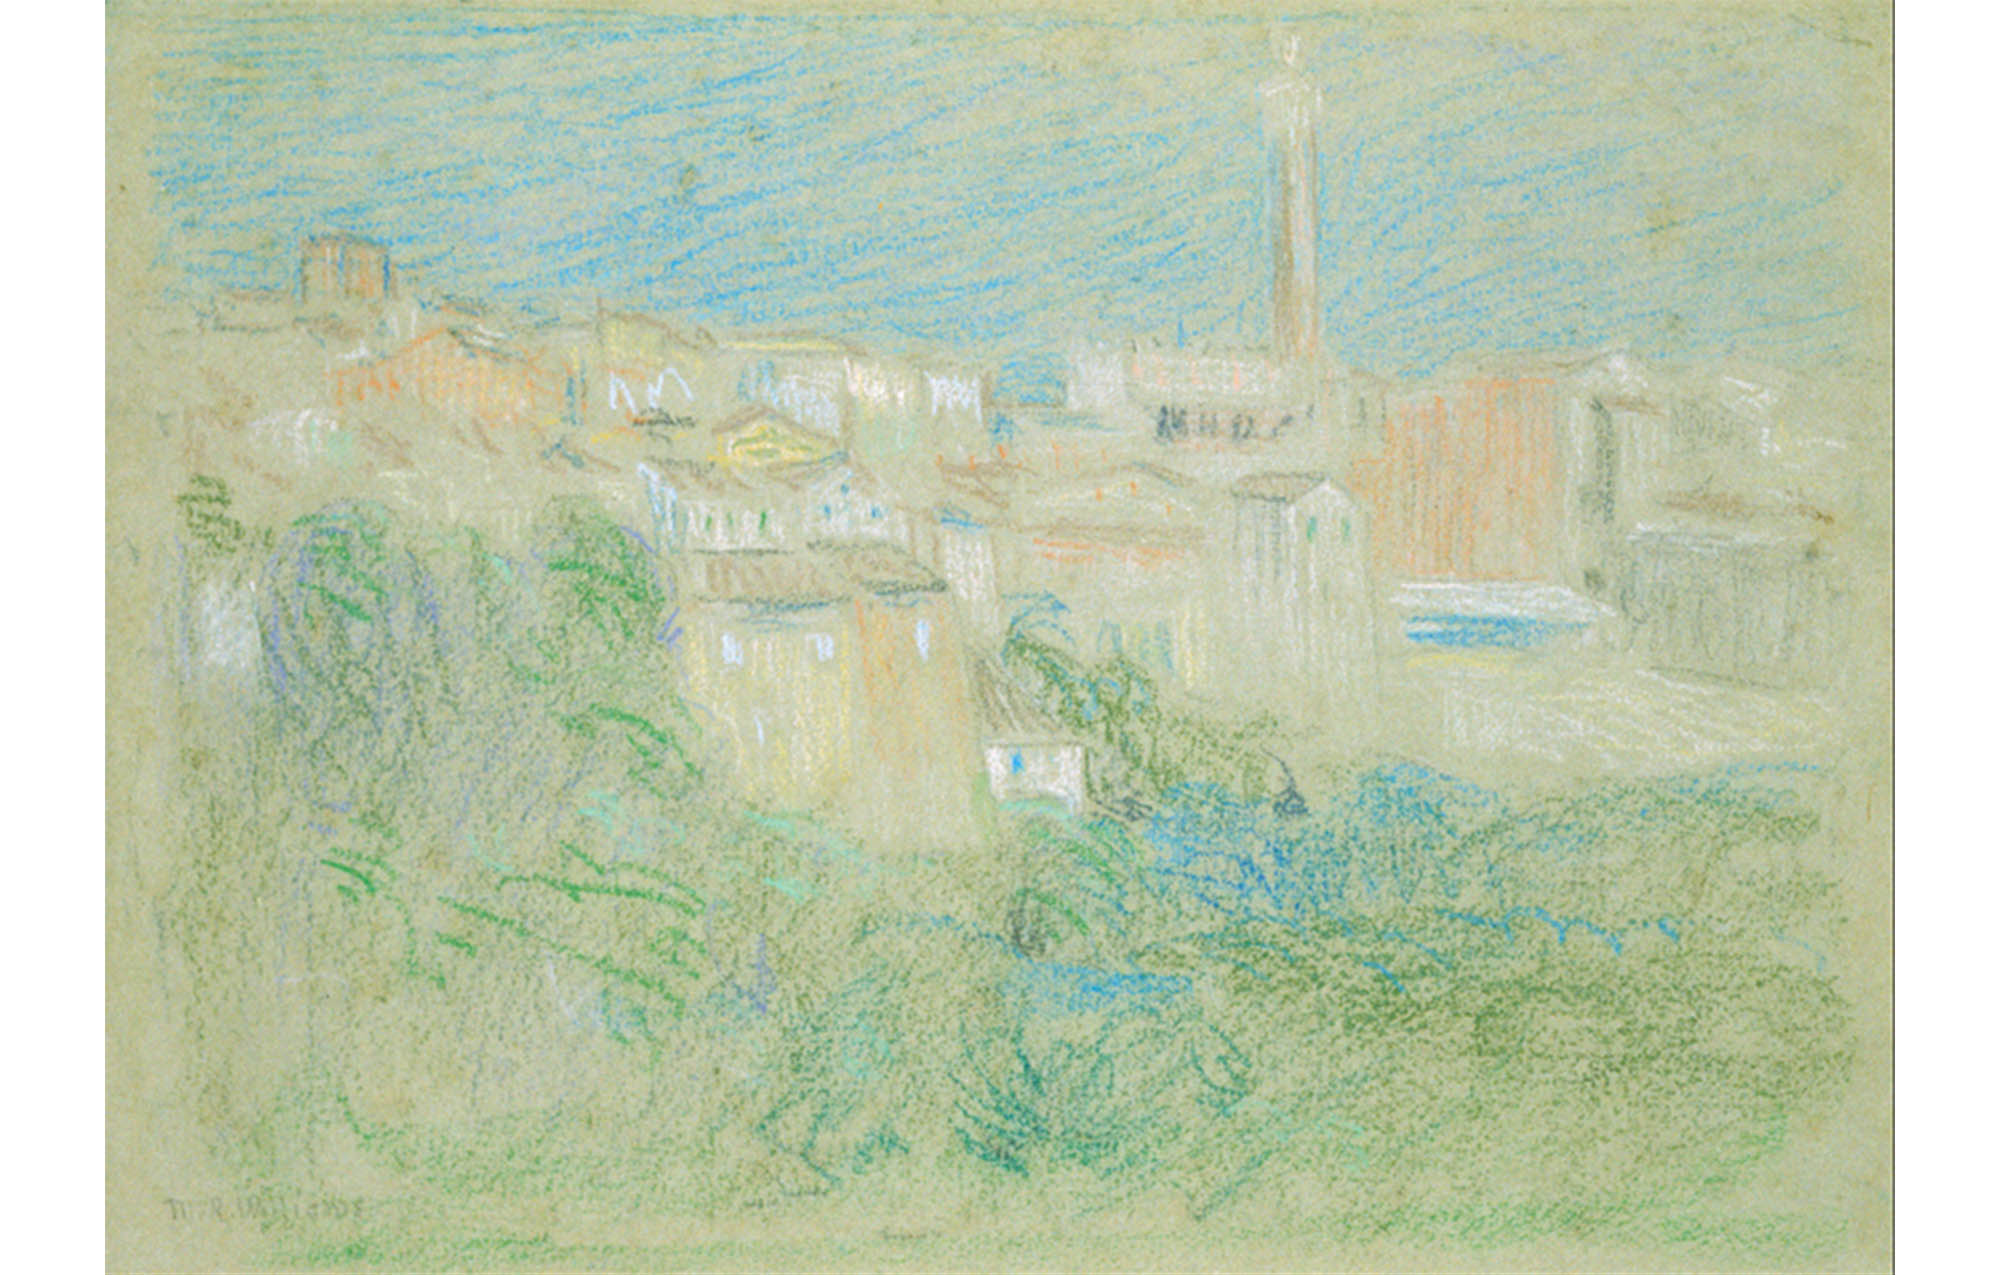 landscape with greenery in the foreground and buildings in the background; blue sky